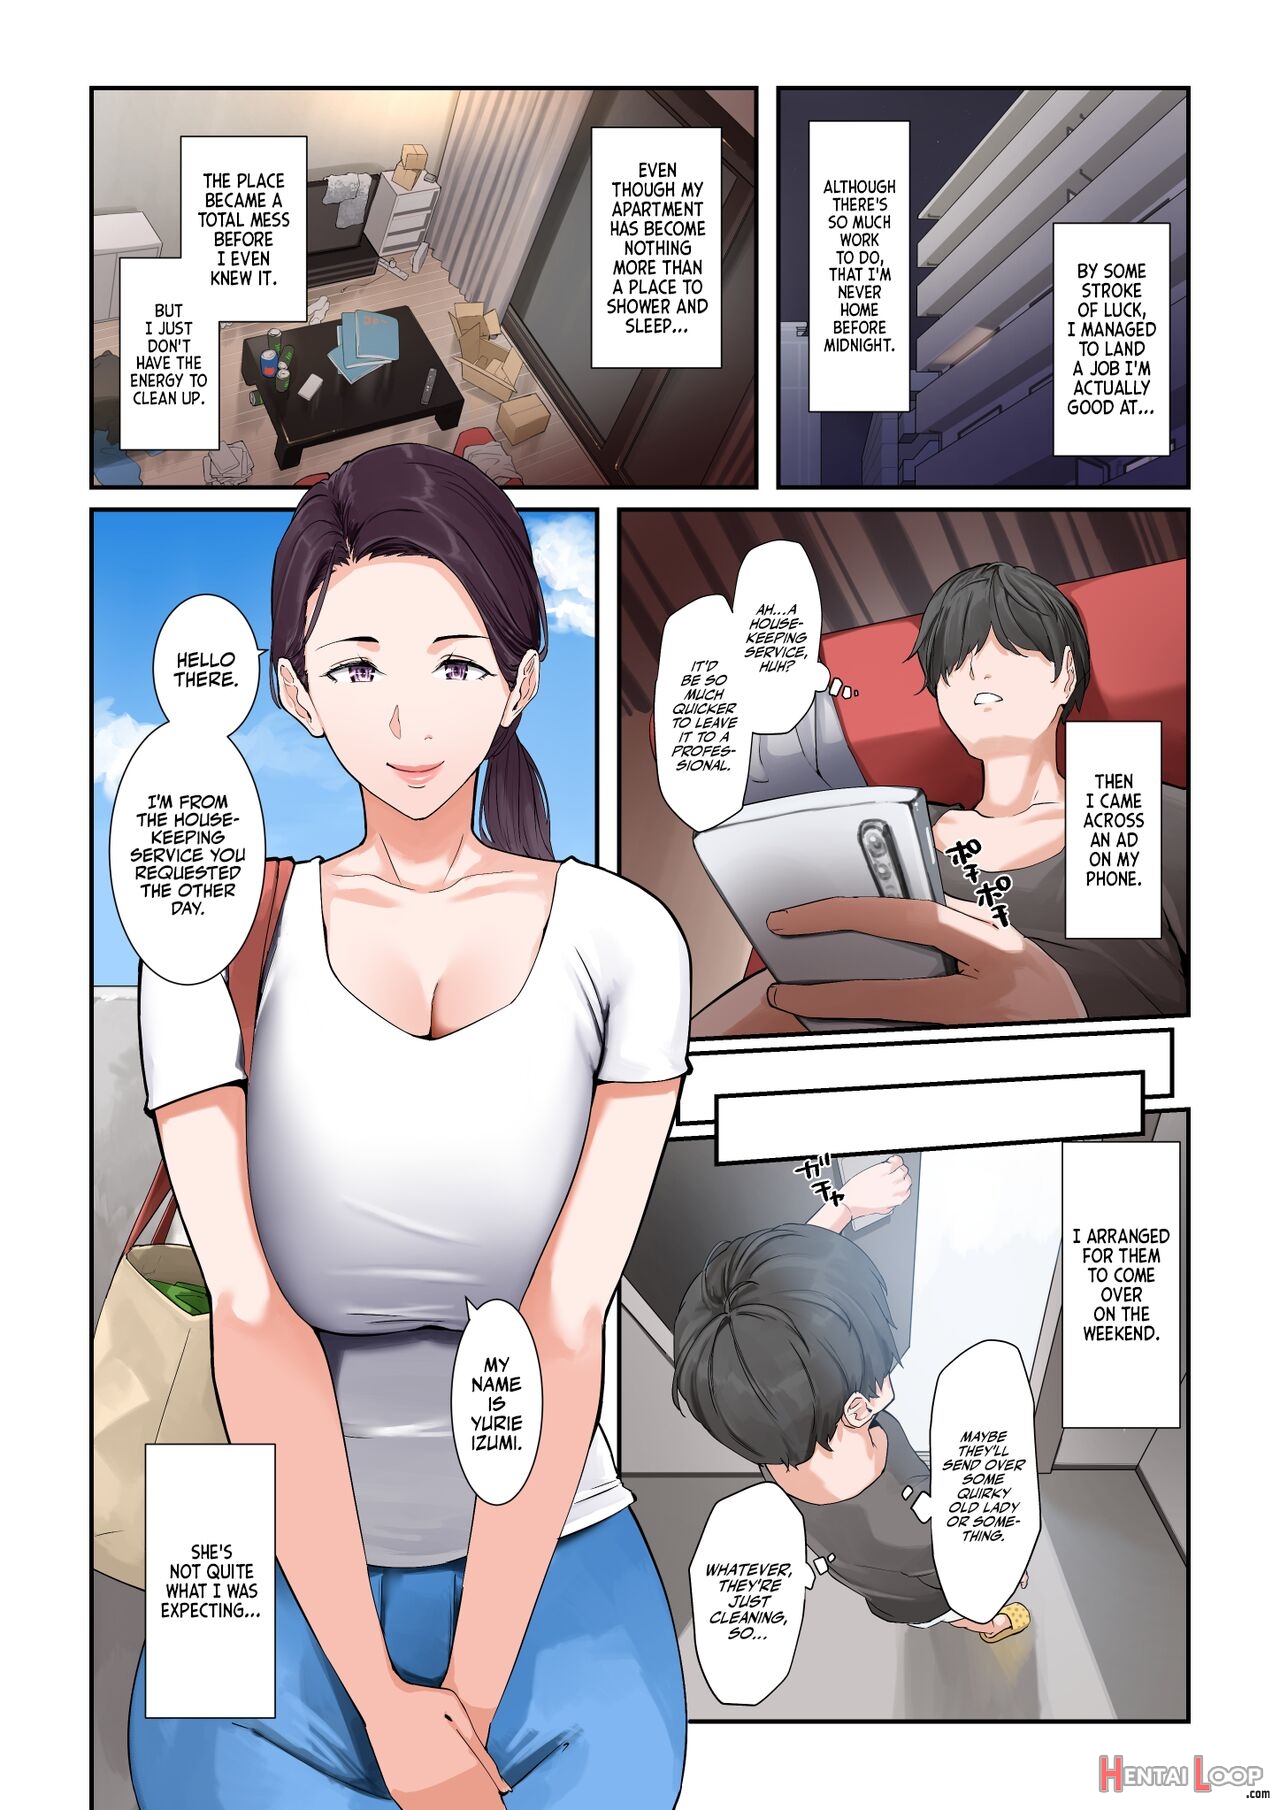 Yurie-san, The Housekeeper Who Will Do Just About Anything page 4